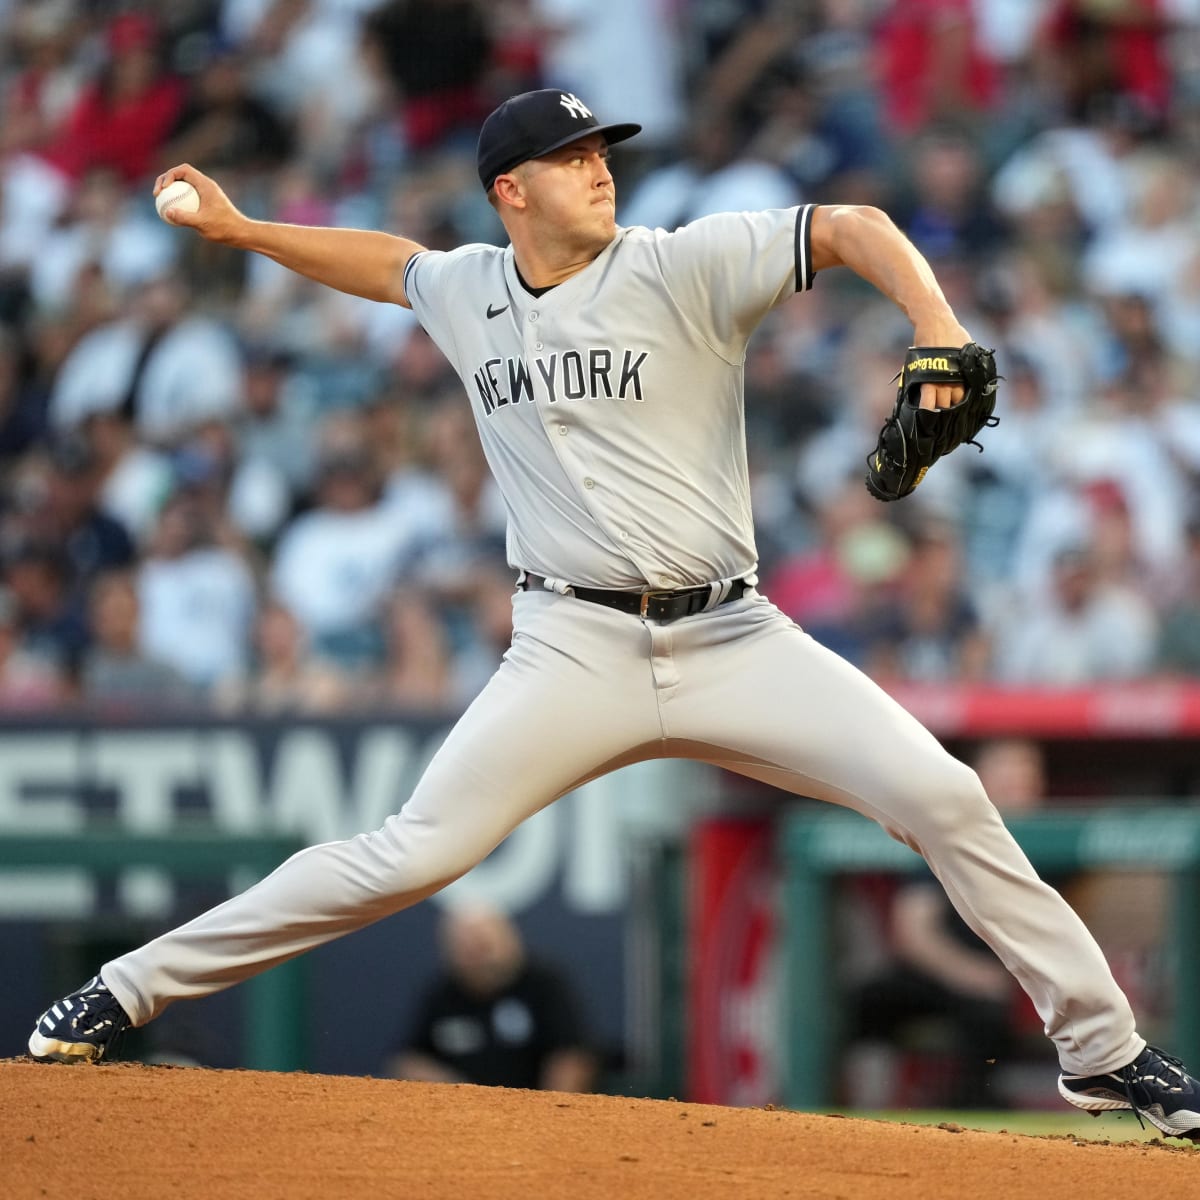 Jameson Taillon excels in Yankees spring training with injury